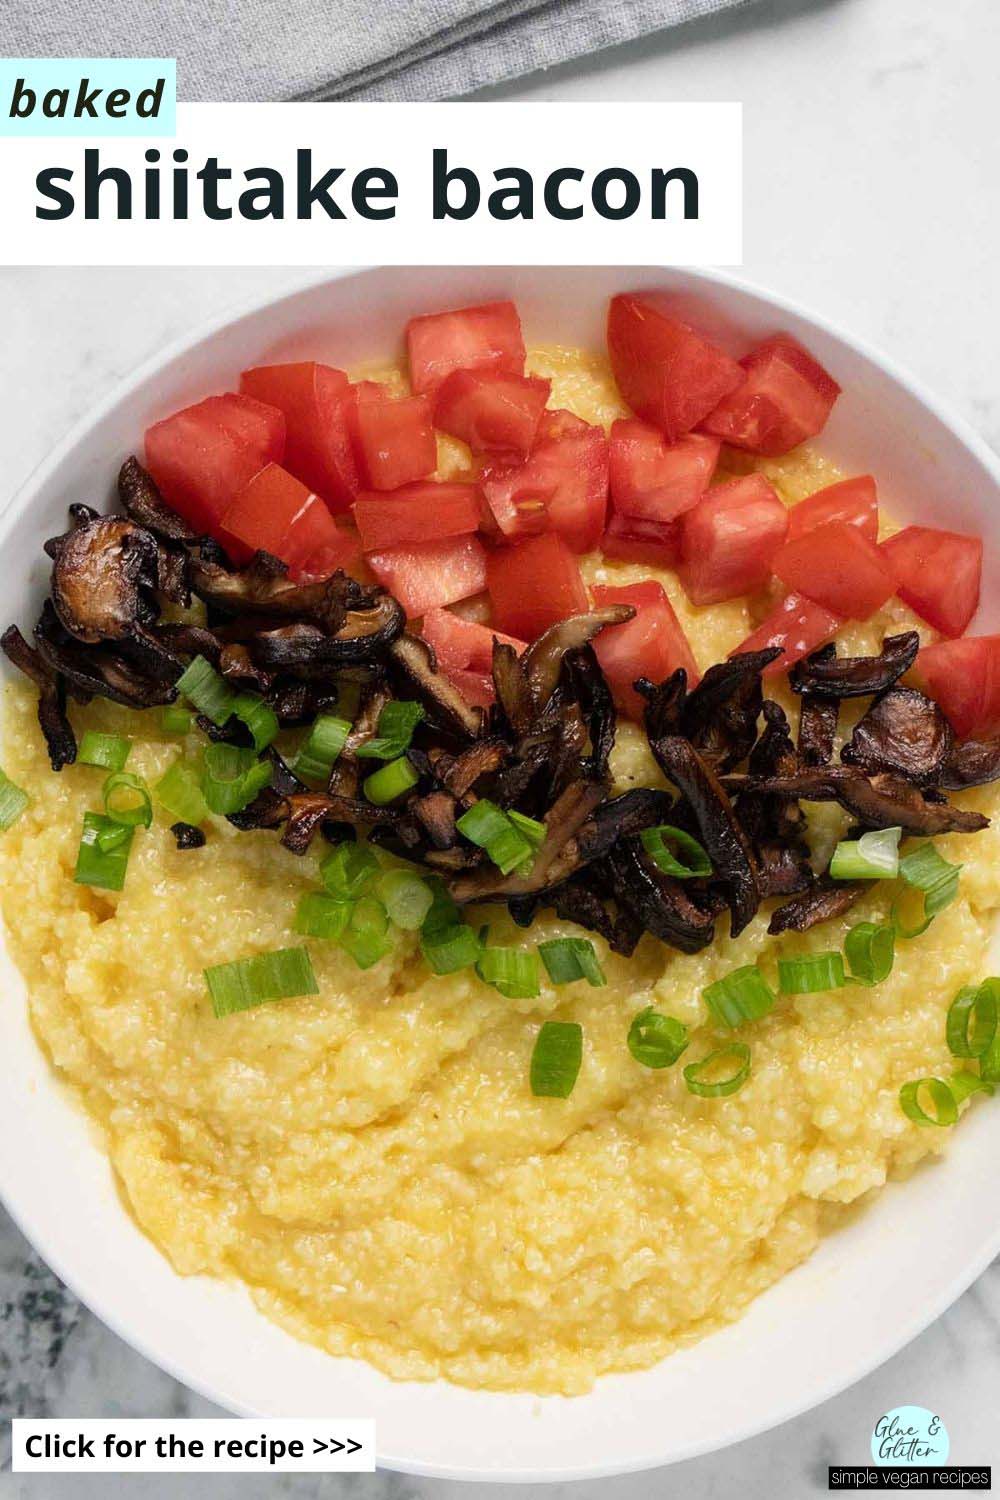 shiitake bacon served over grits with tomato and green onion, text overlay